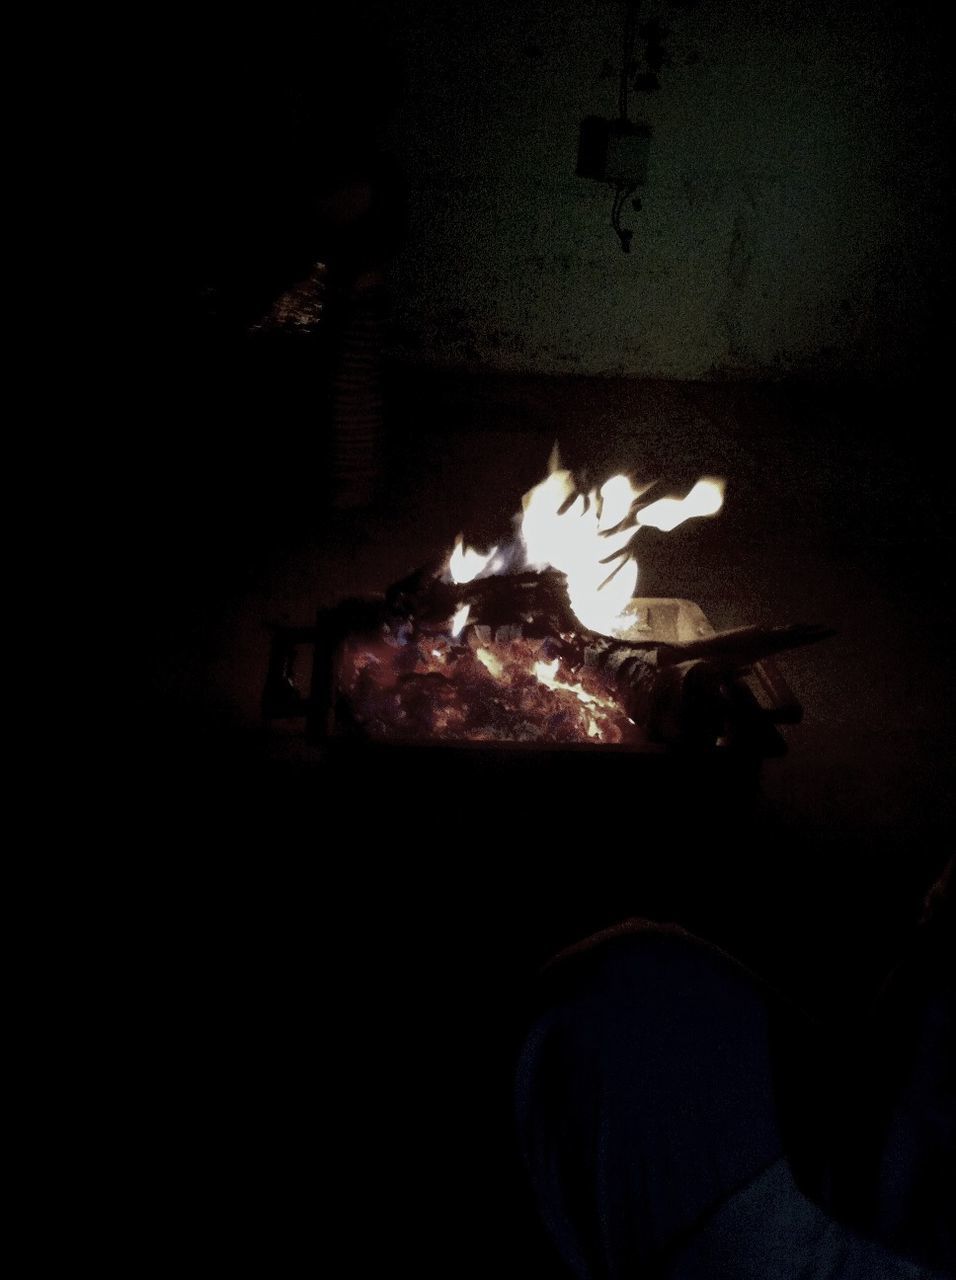 indoors, dark, burning, flame, high angle view, fire - natural phenomenon, night, illuminated, close-up, heat - temperature, shoe, light - natural phenomenon, one person, wall - building feature, darkroom, glowing, home interior, shadow, messy, still life